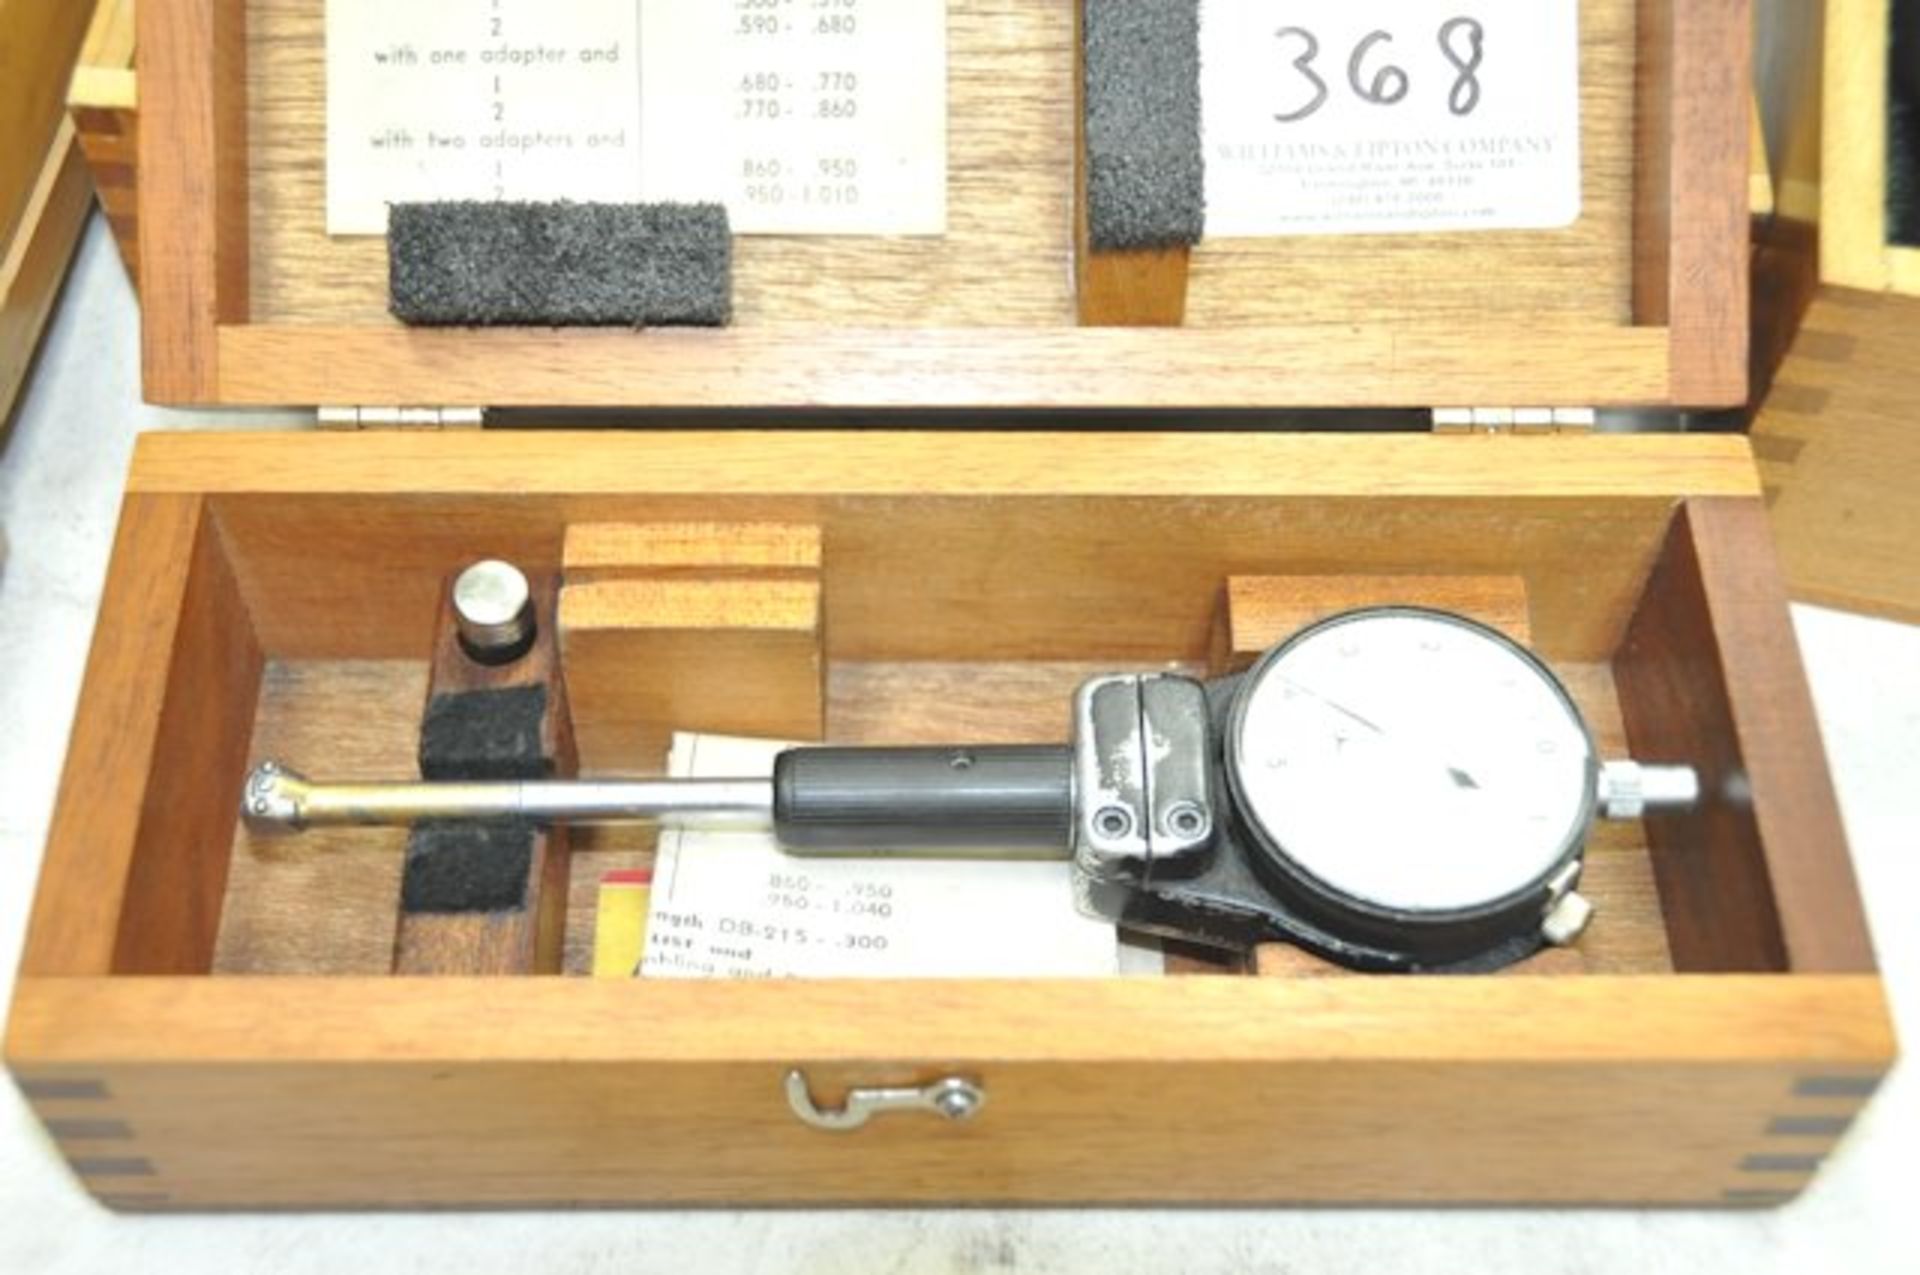 BOICE Carbide Tipped Bore Gage with Mitutoyo Dial Indicator and Case